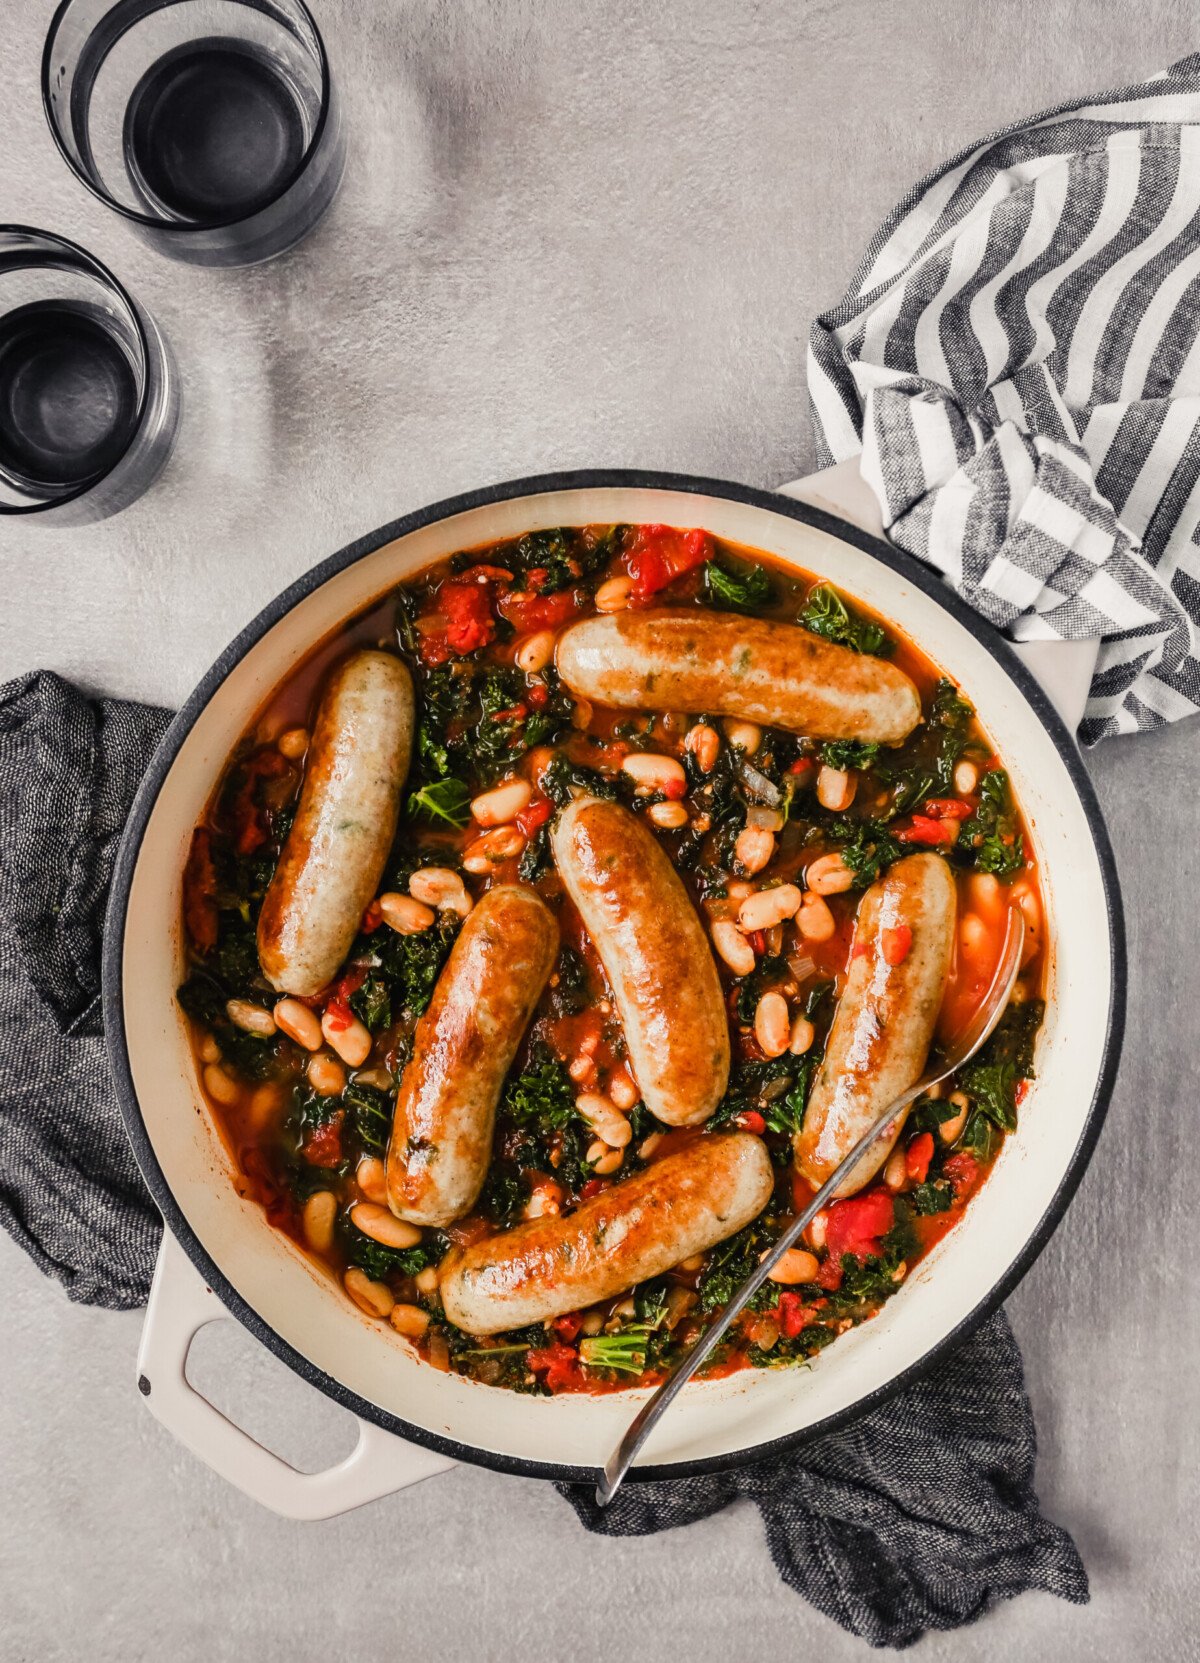 Overhead photograph of a Dutch oven filled with Italian chicken sausages stewed in tomatoes, kale and white beans